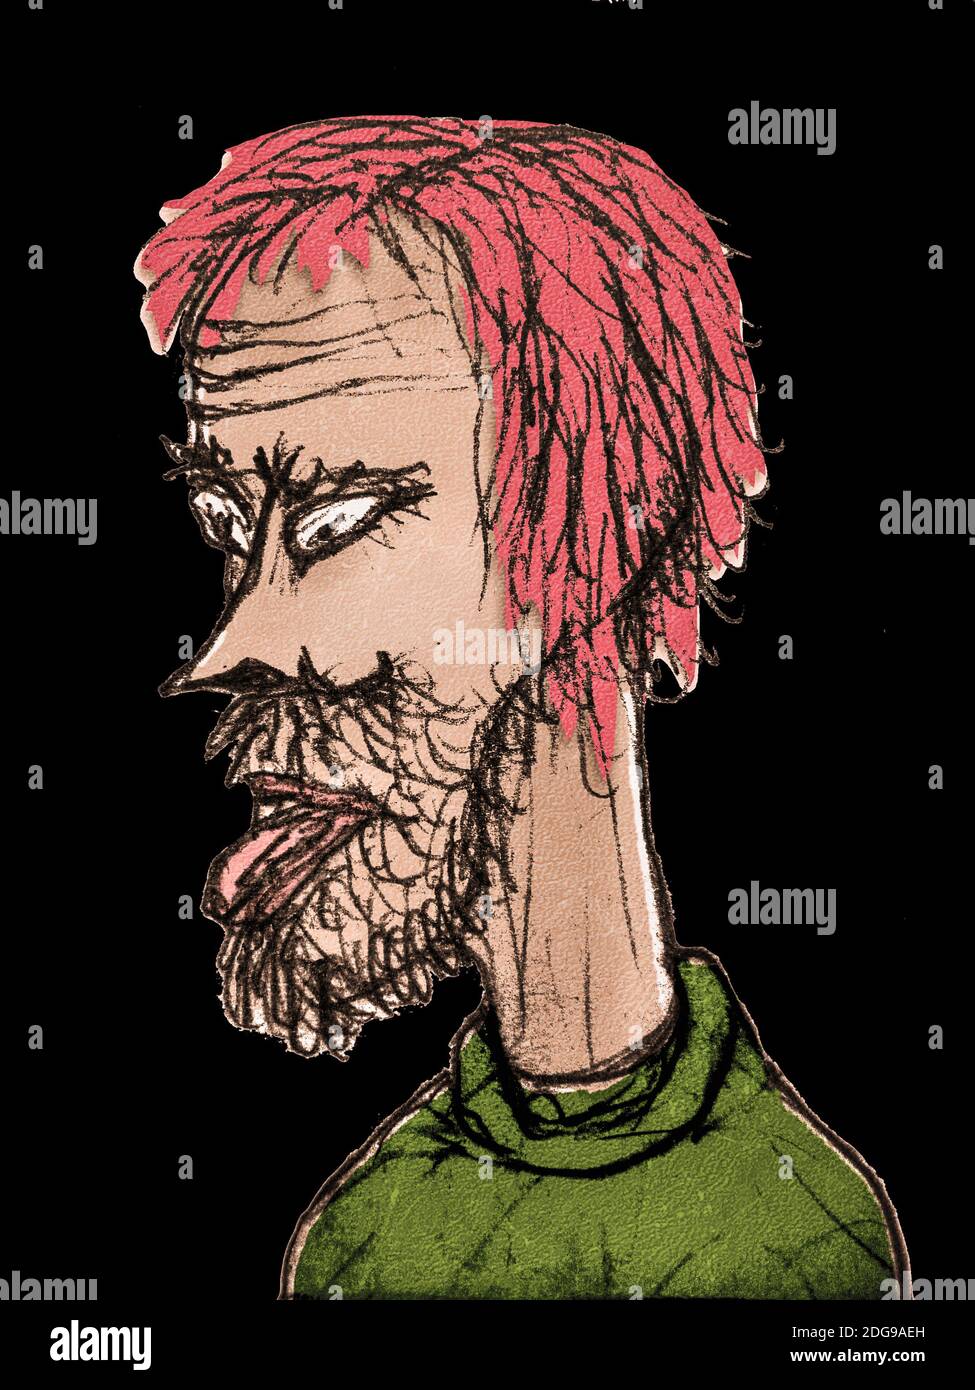 Man With Aggressive Expression Drawing Stock Photo Alamy